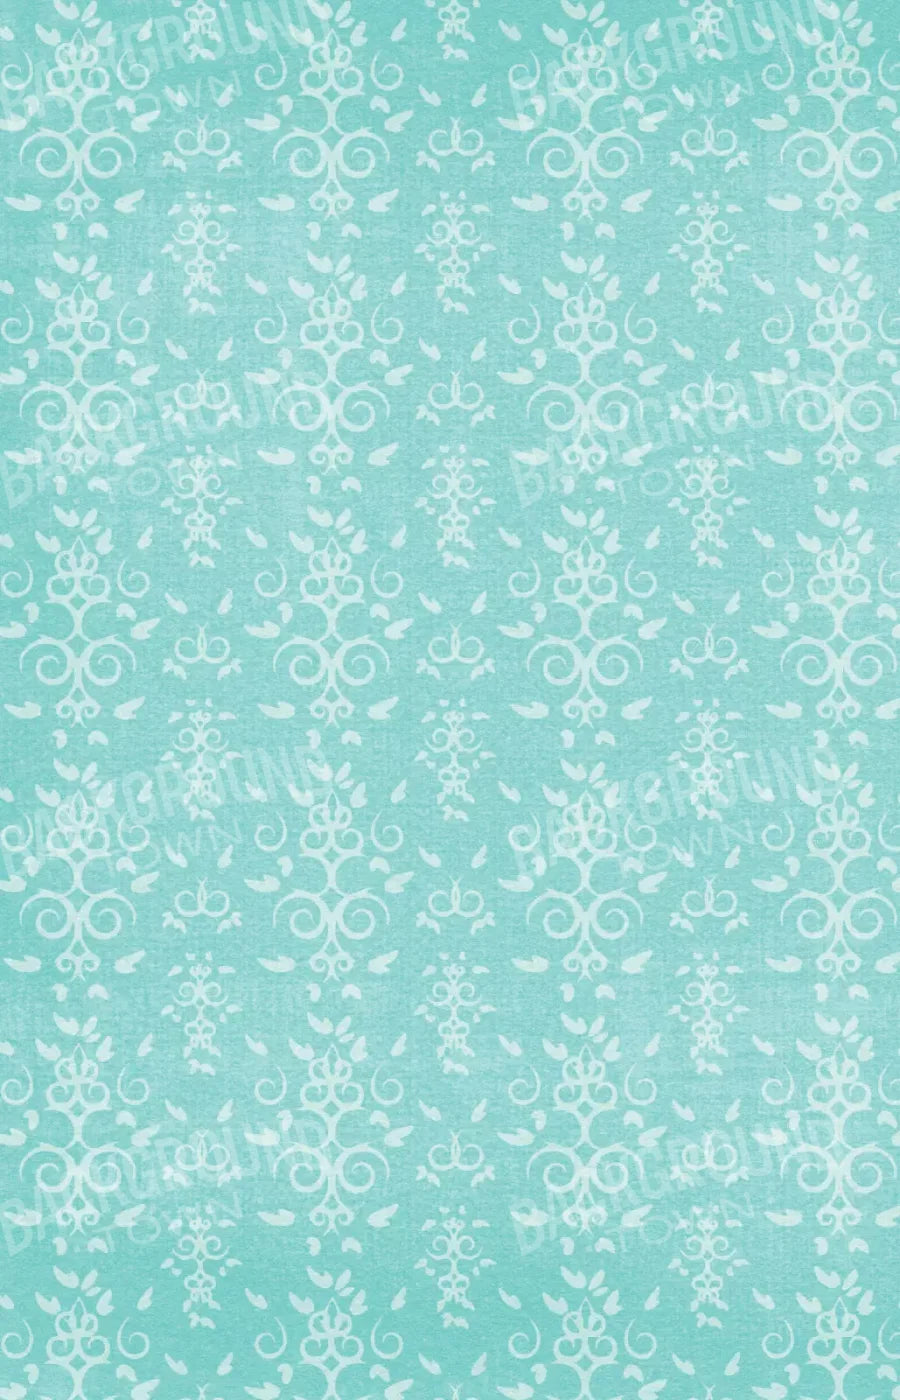 Frosted Elegance 8X12 Ultracloth ( 96 X 144 Inch ) Backdrop